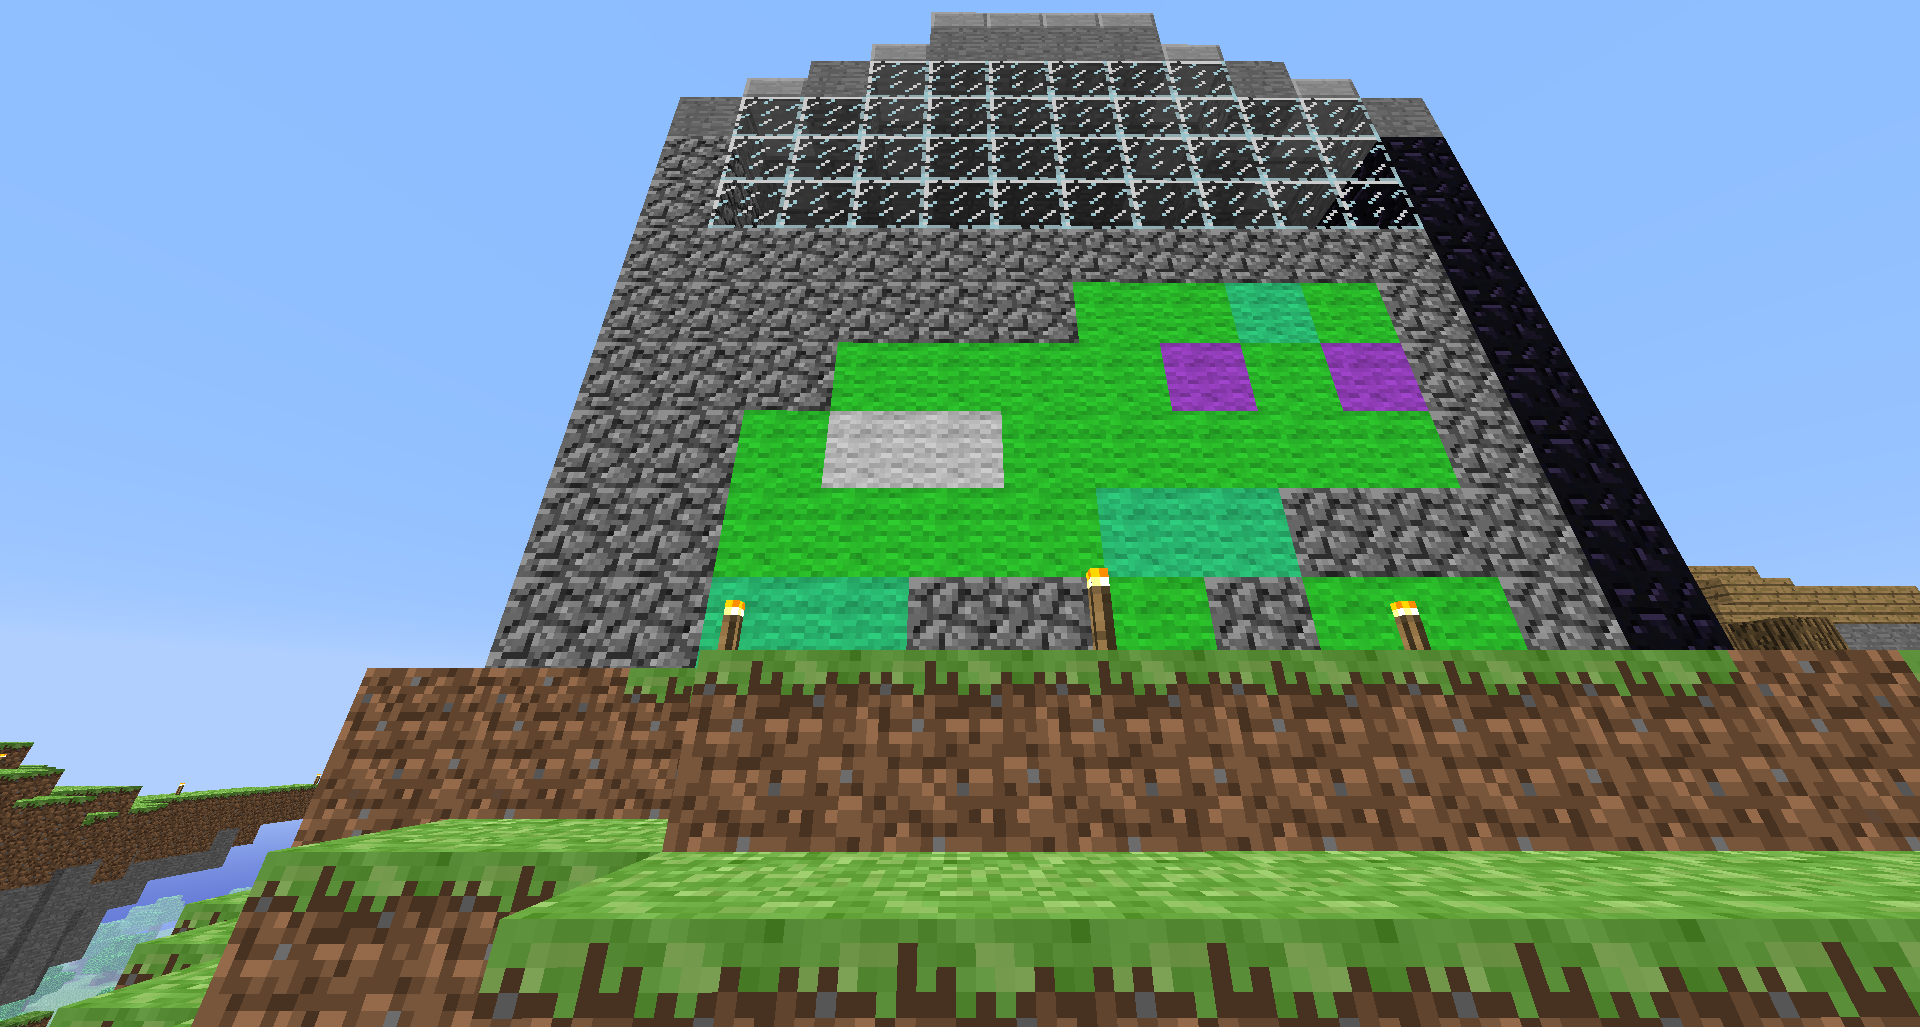 Pixel art of a frog on a minecraft building